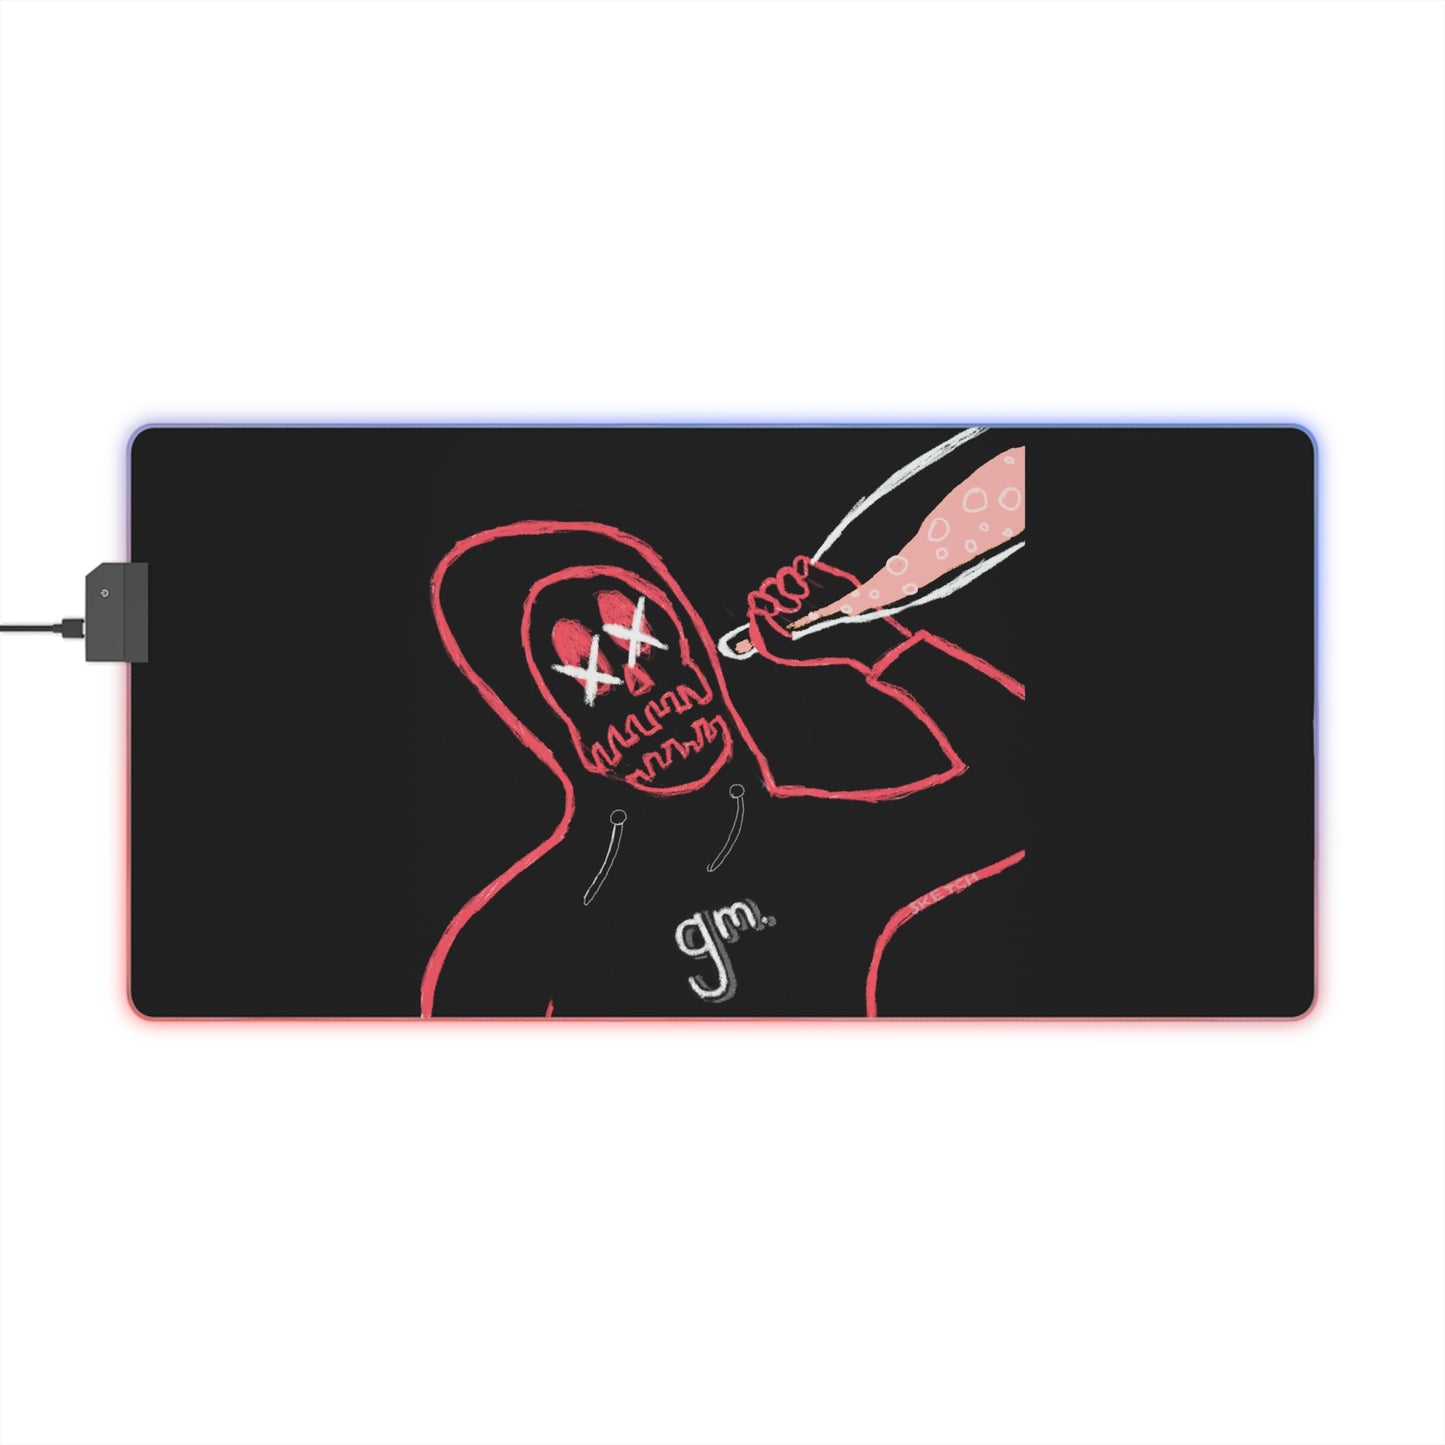 LED Gaming Mouse Pad feat rektguy #889